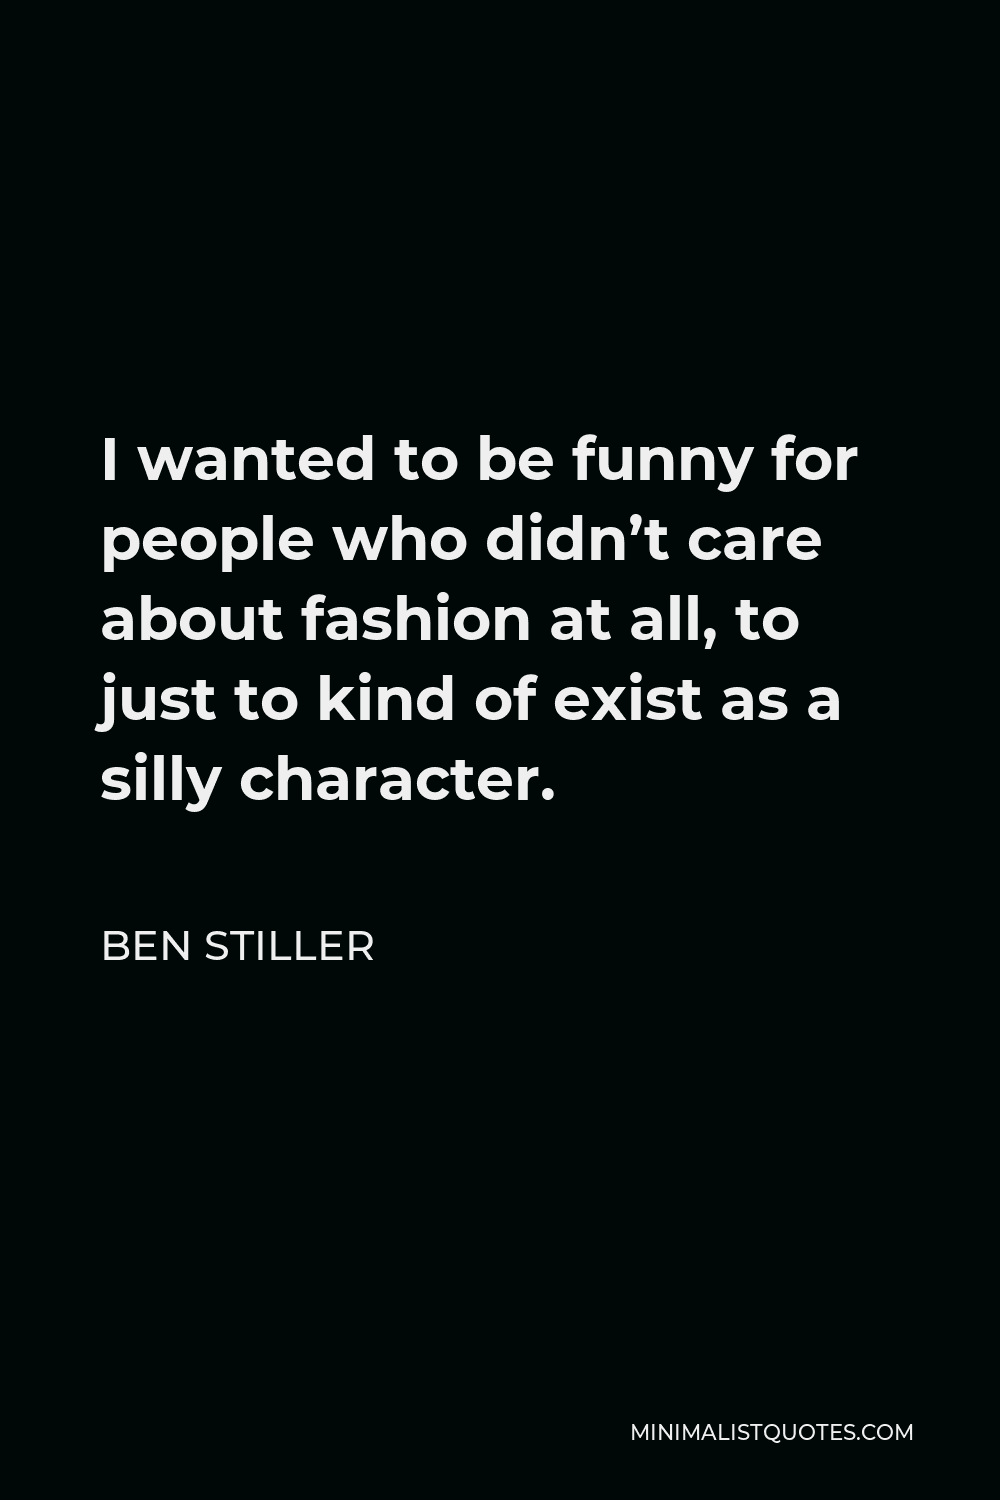 Ben Stiller Quote - I wanted to be funny for people who didn’t care about fashion at all, to just to kind of exist as a silly character.